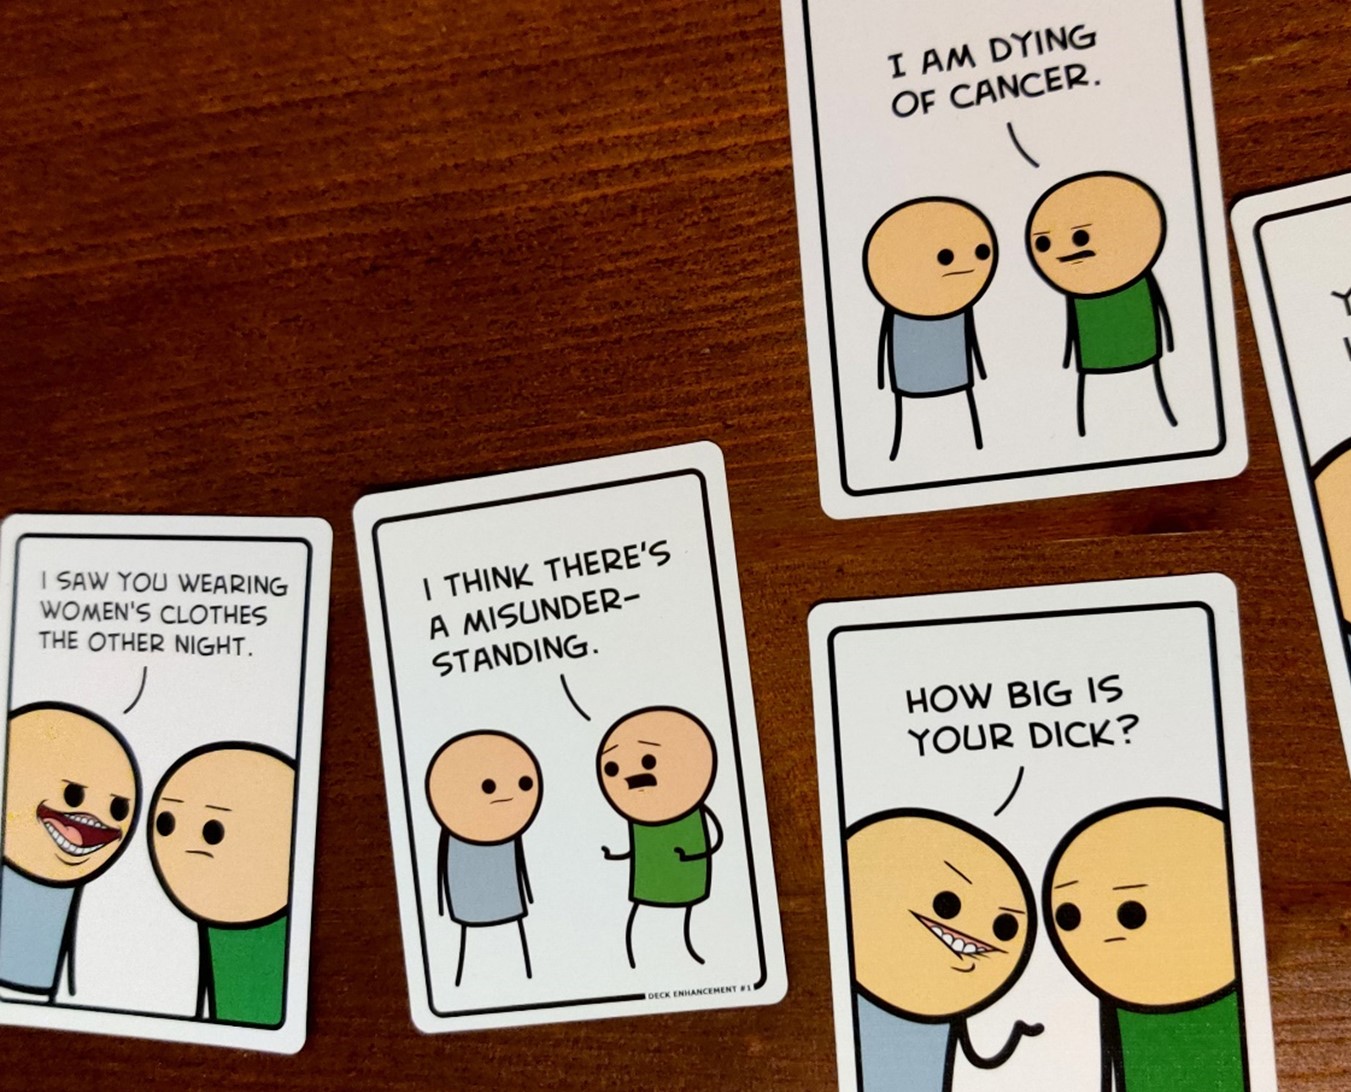 Joking Hazard The Edgy Kid of Offensive Card Games PlayLab! Magazine